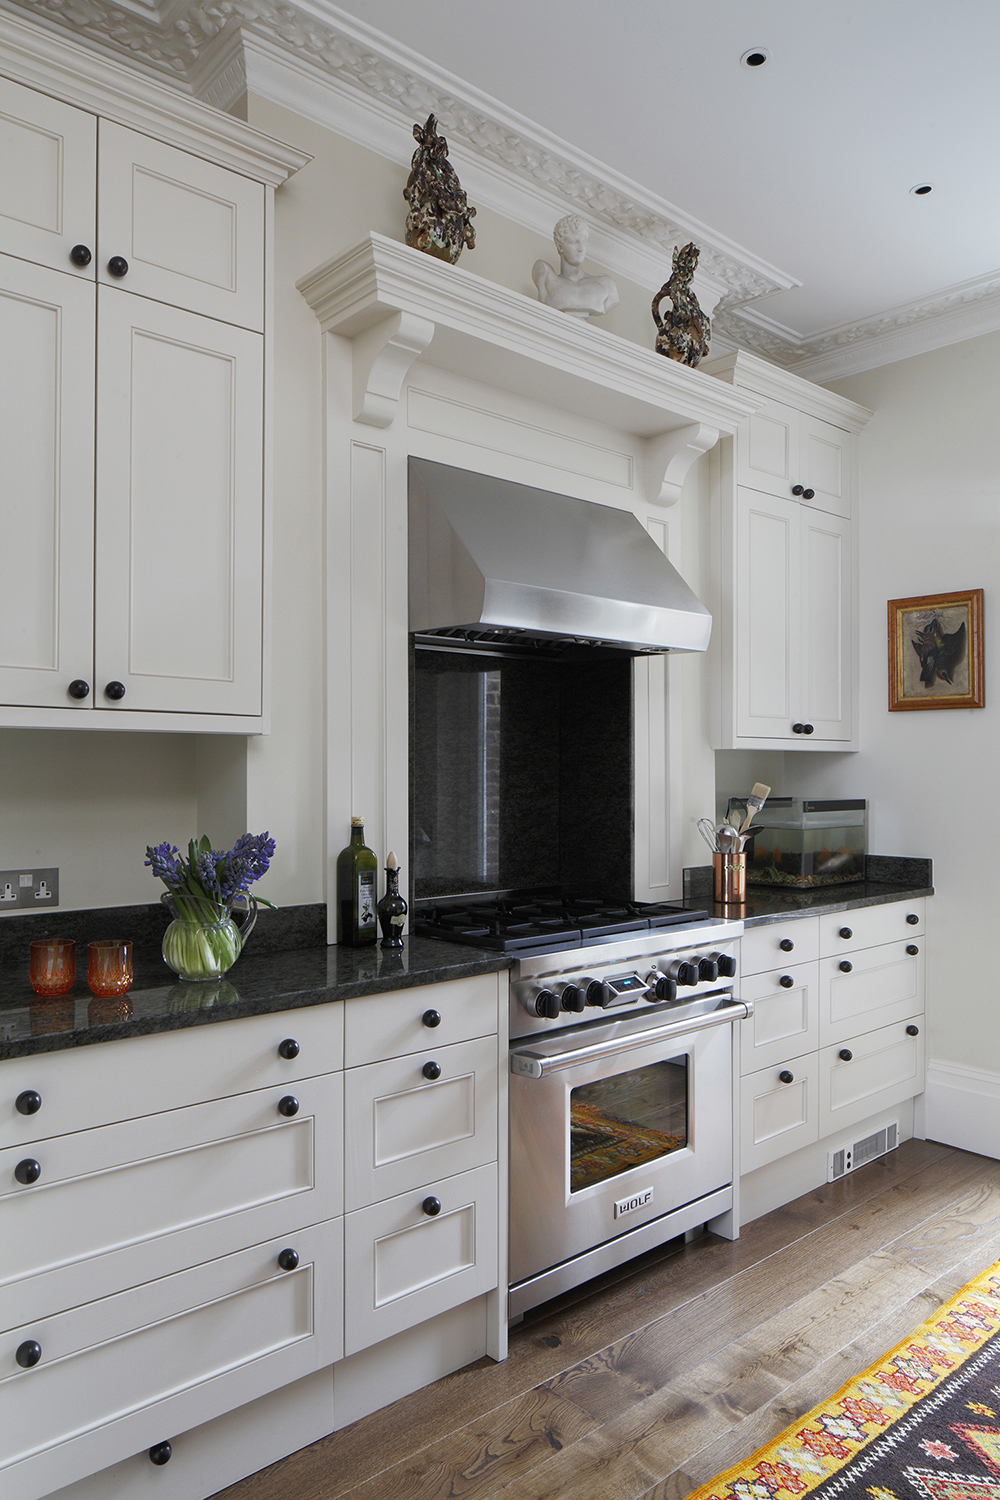 Custom built joinery with a stylish mottled black and mustard granite worktop.